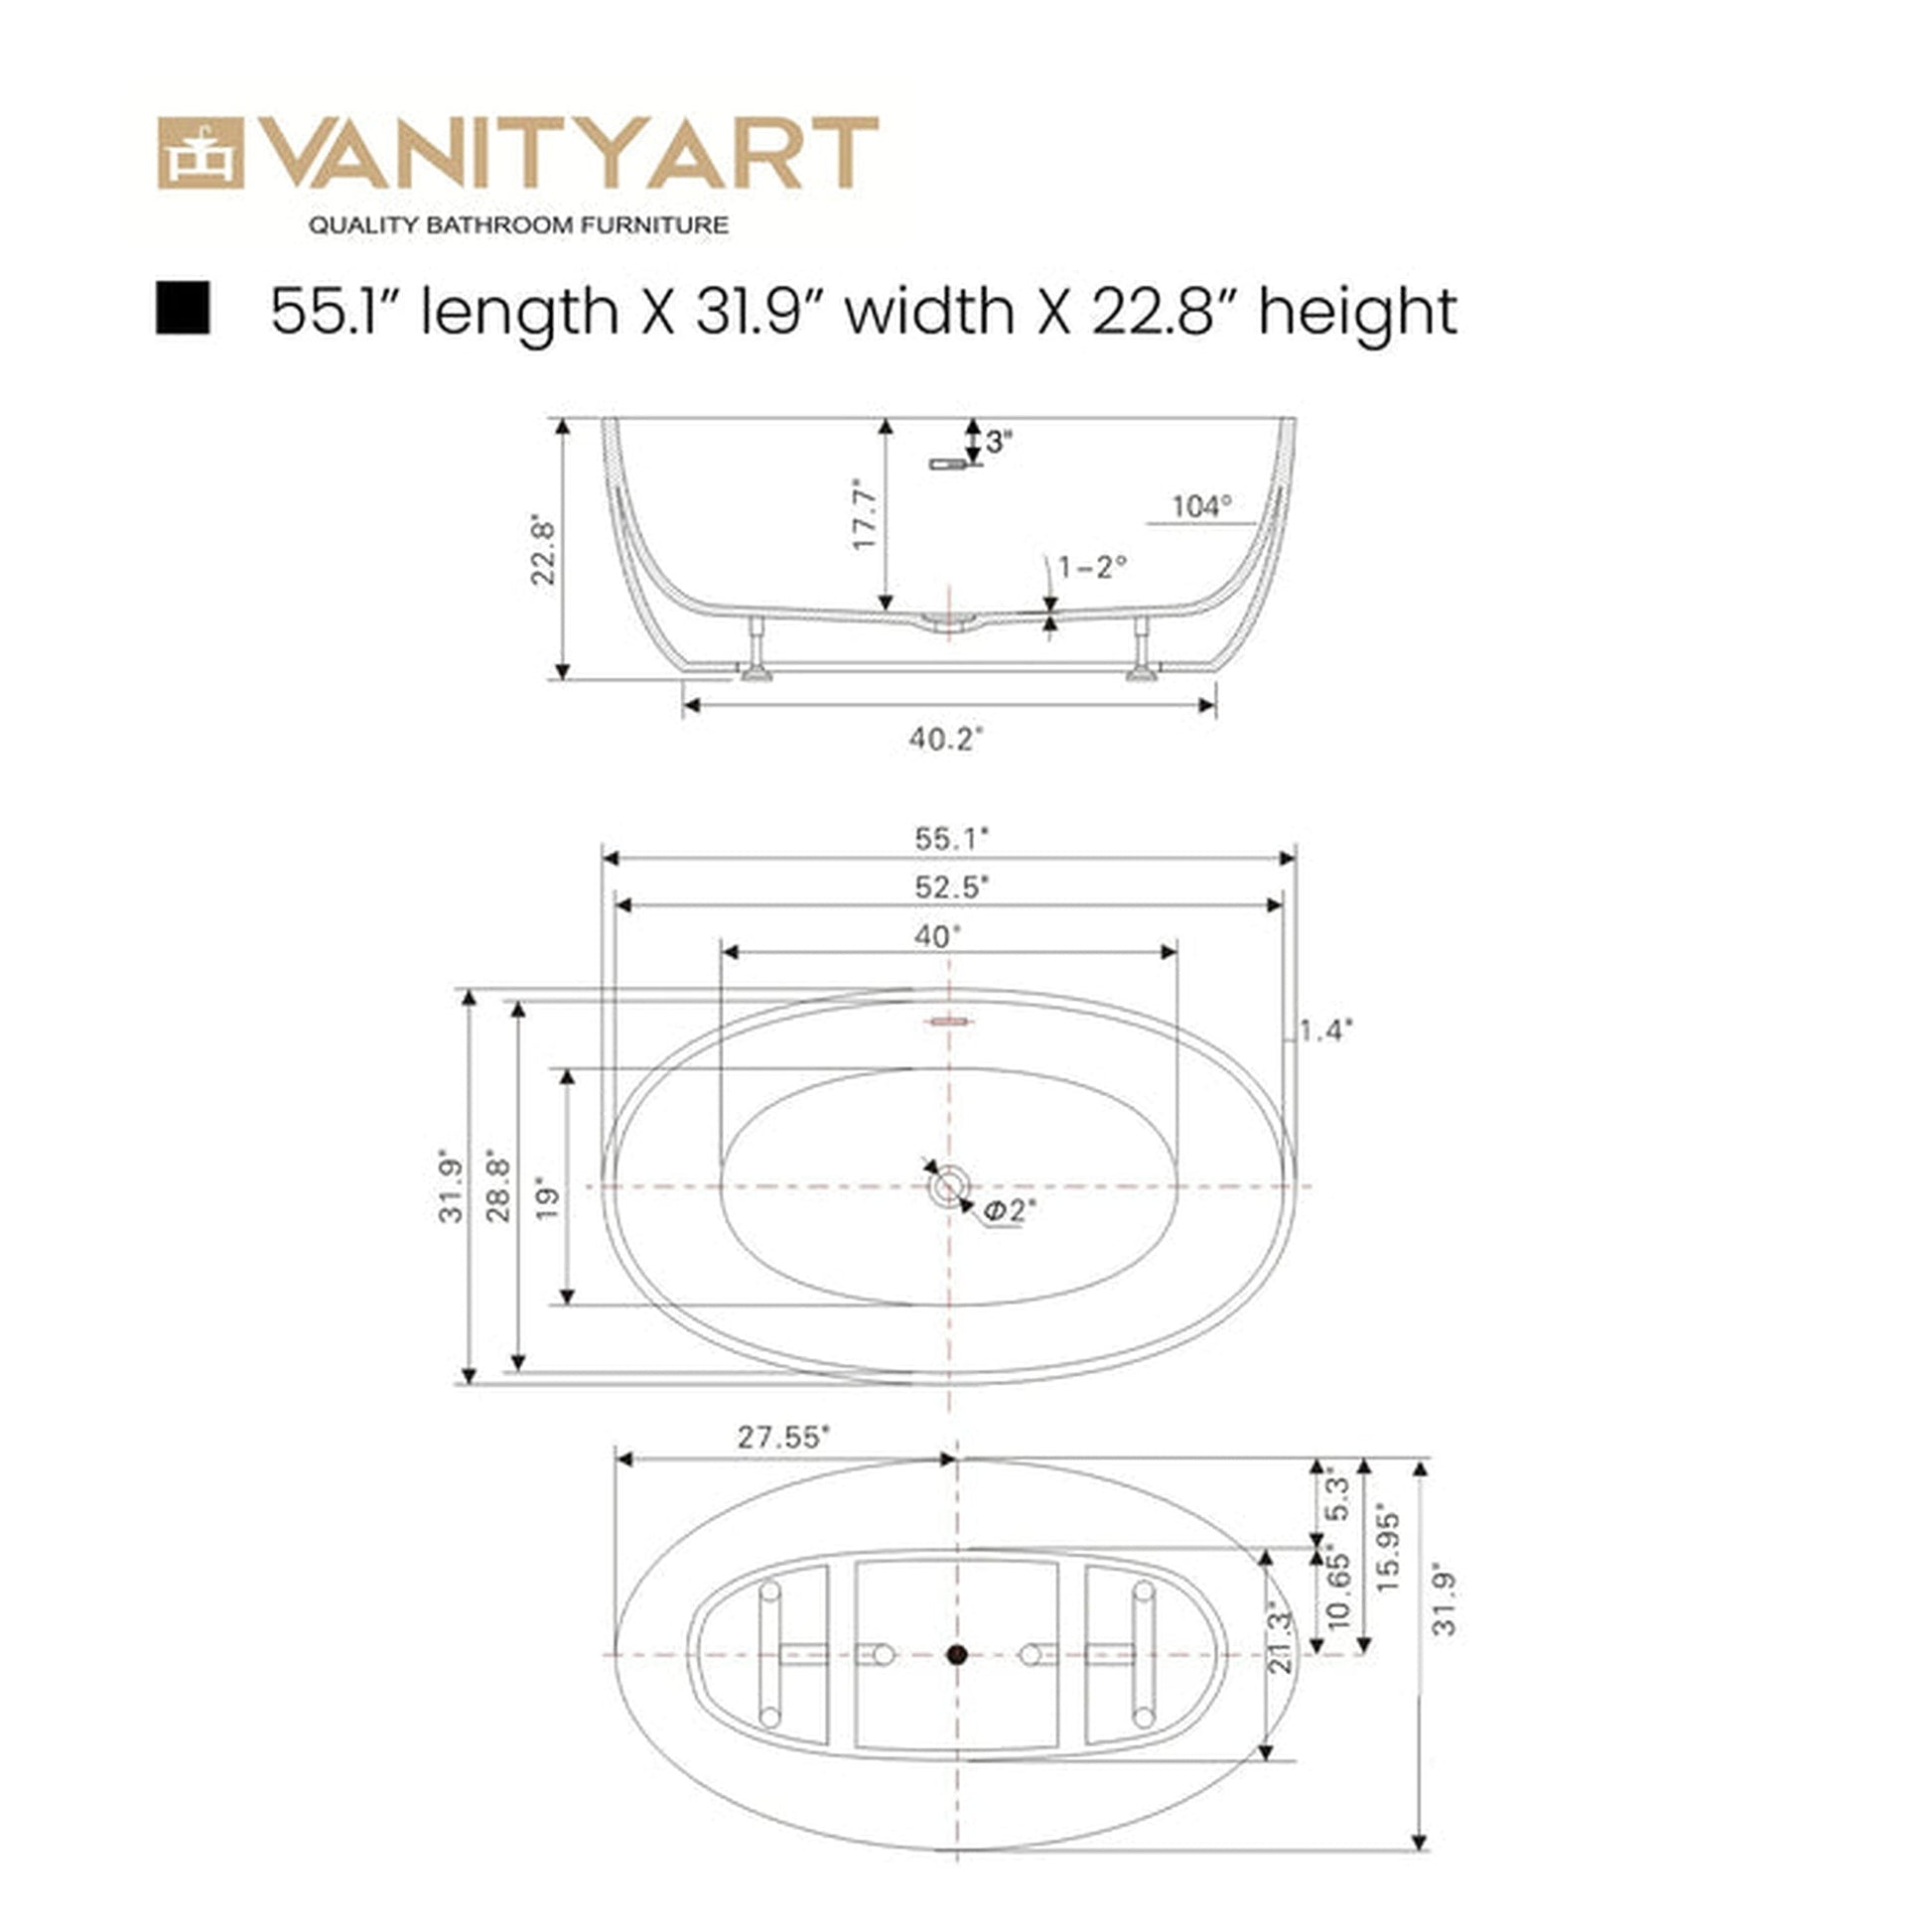 Vanity Art 55" x 32" White Acrylic Freestanding Contemporary Design Soaking Bathtub With Oil Rubbed Bronze Slotted Overflow & Pop-up Drain